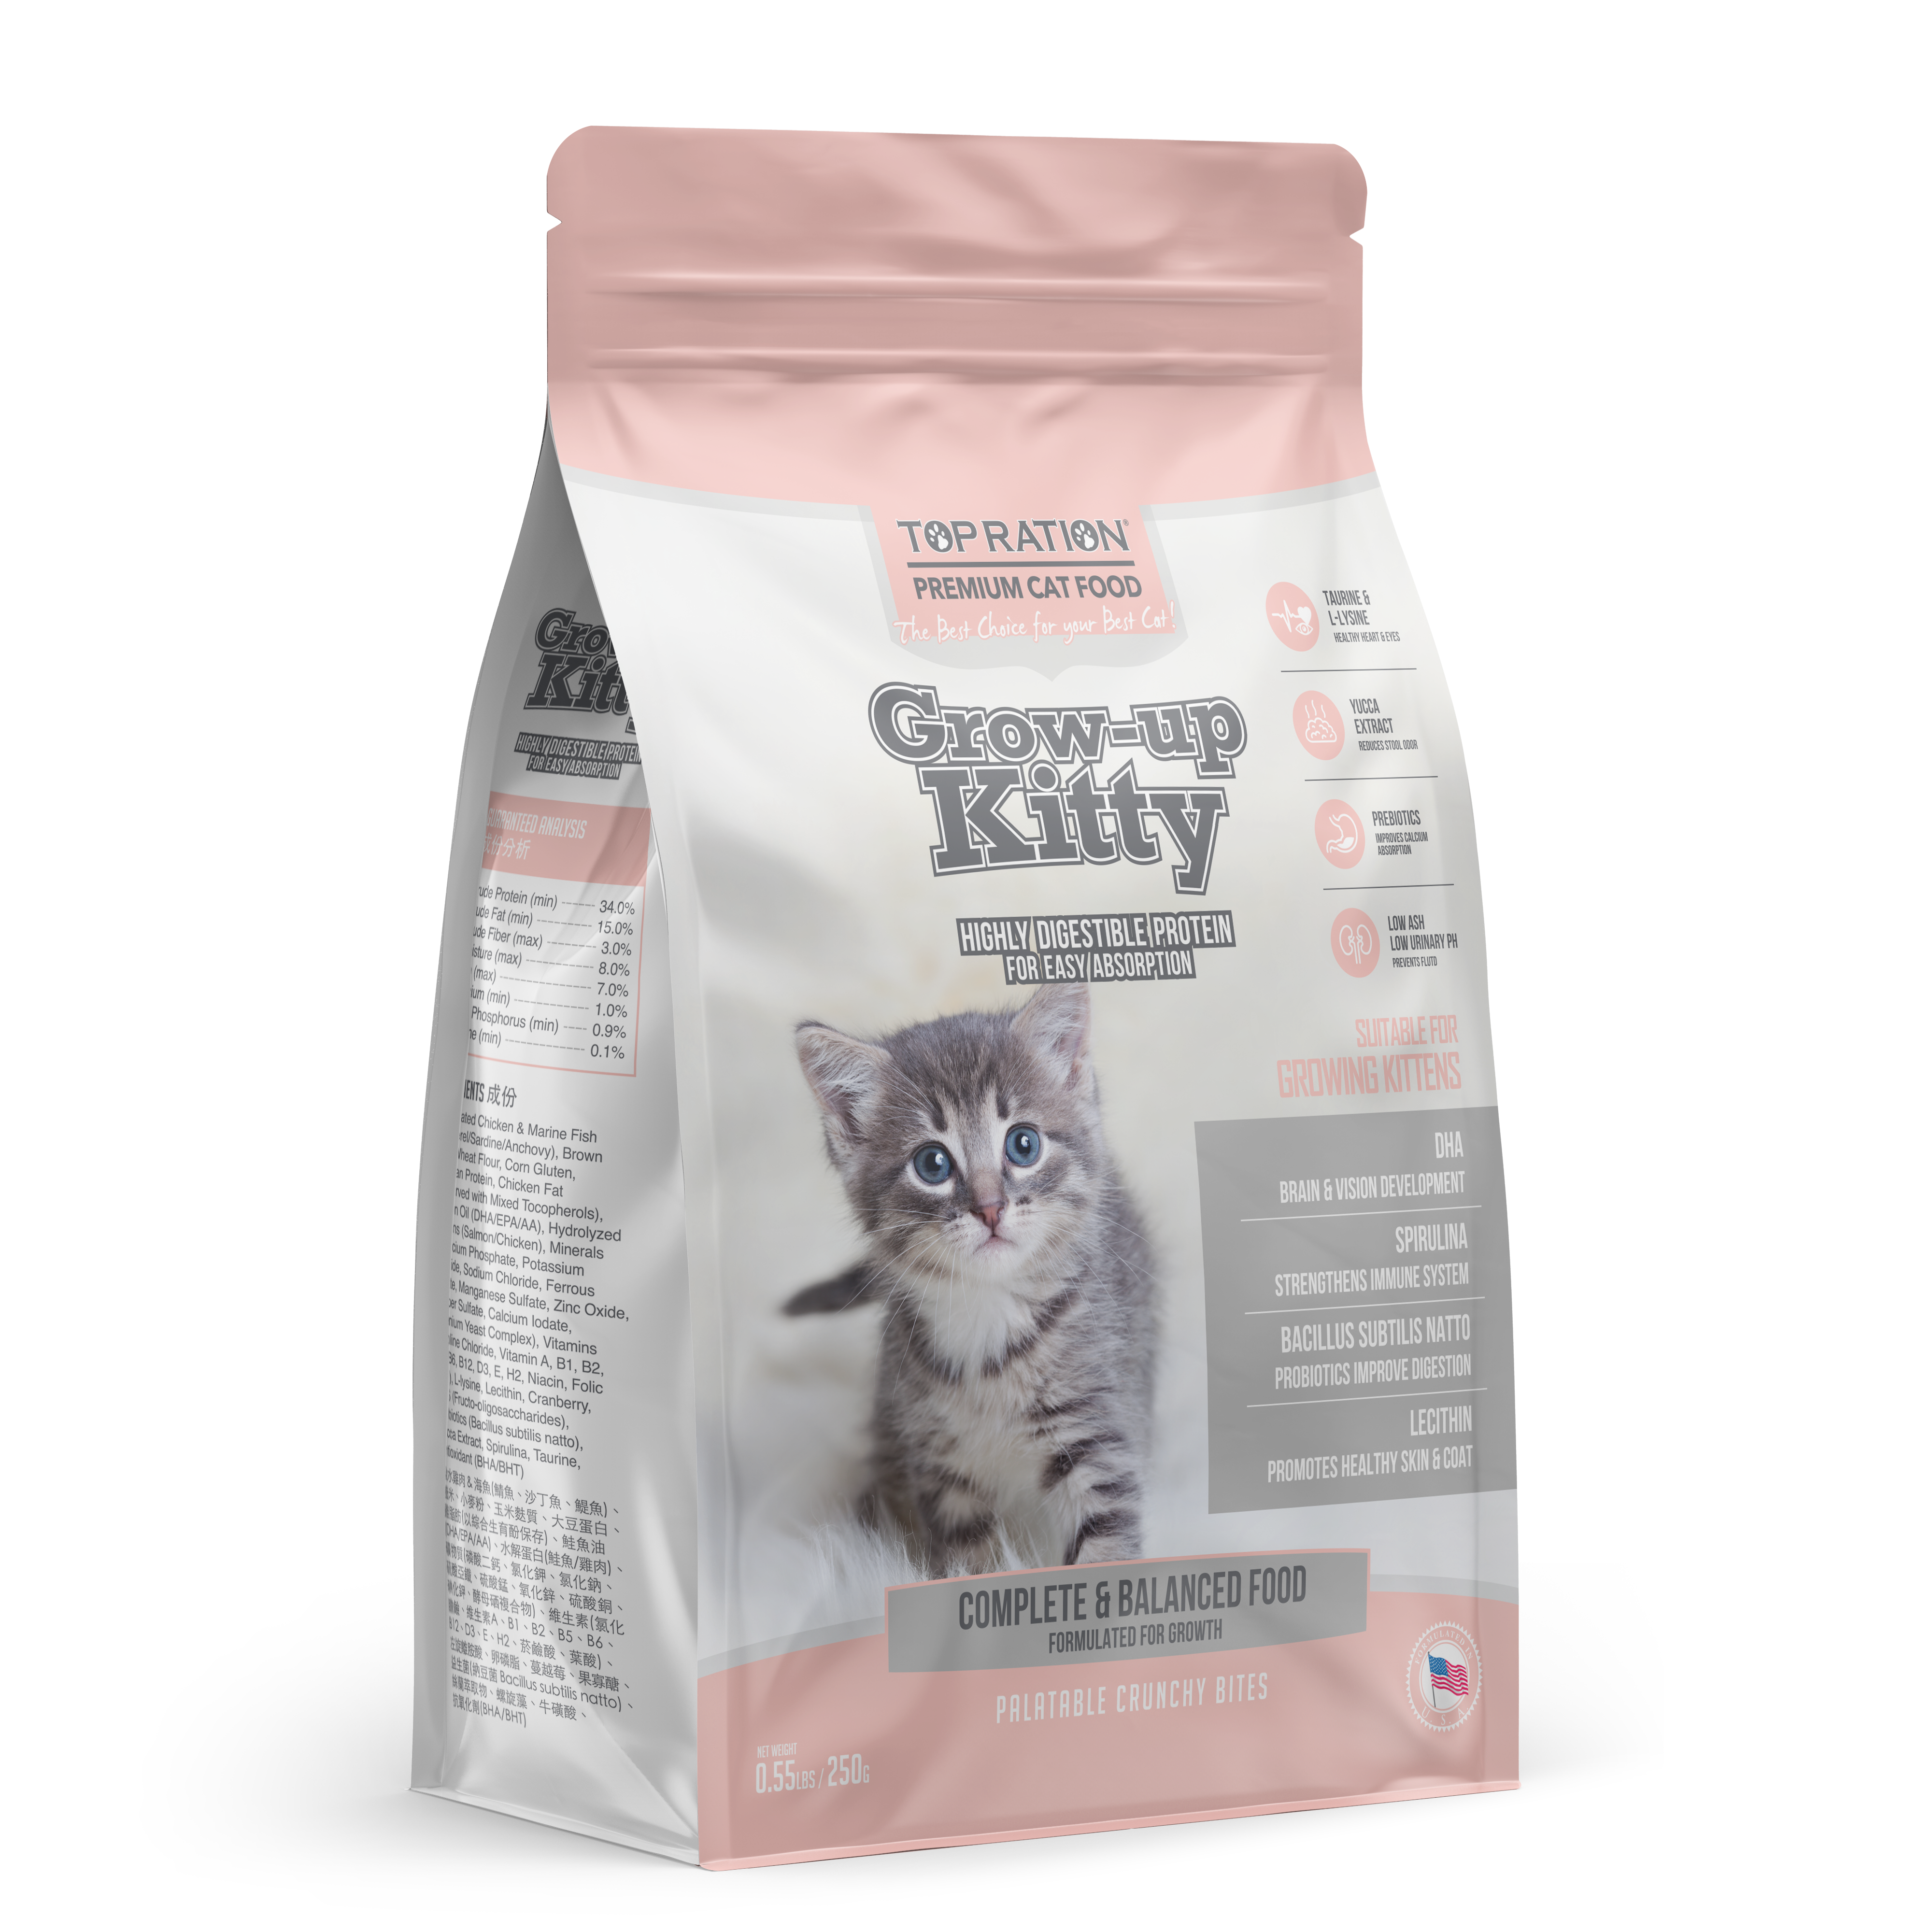 Top Ration Premium Dry Cat Food (Grow-up Kitty)